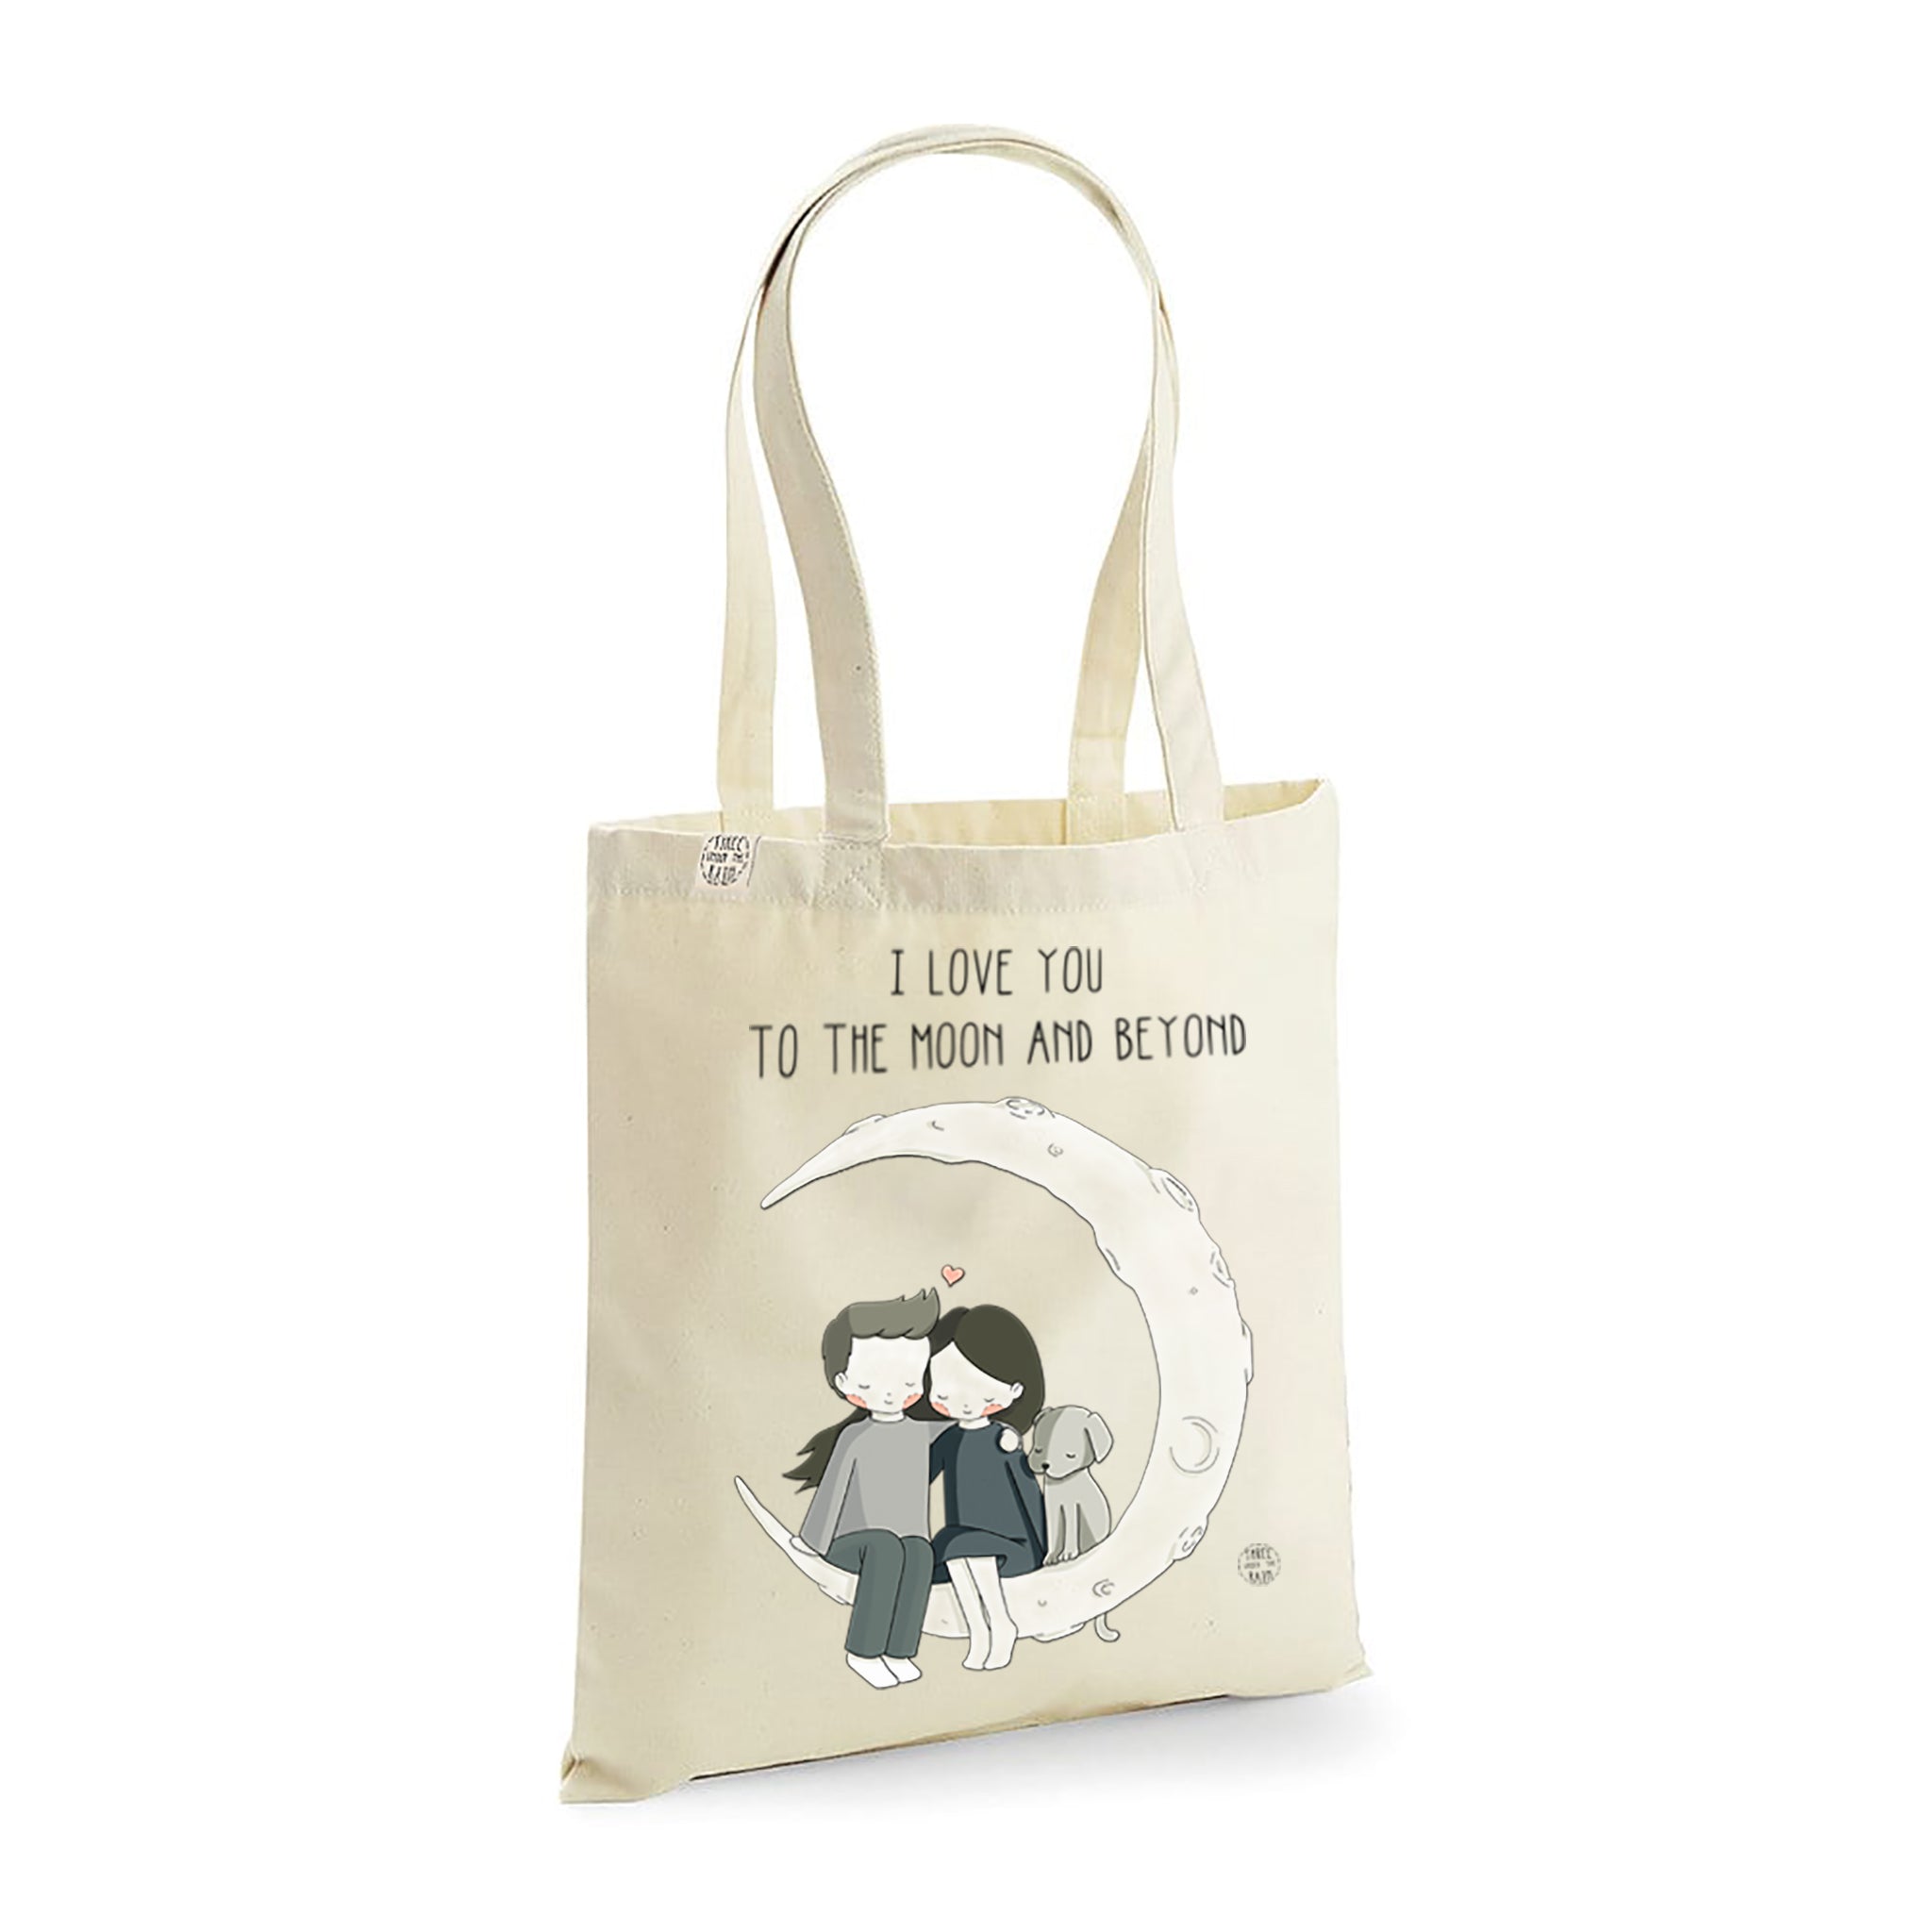 Love You to the Moon and Beyond Tote Bag